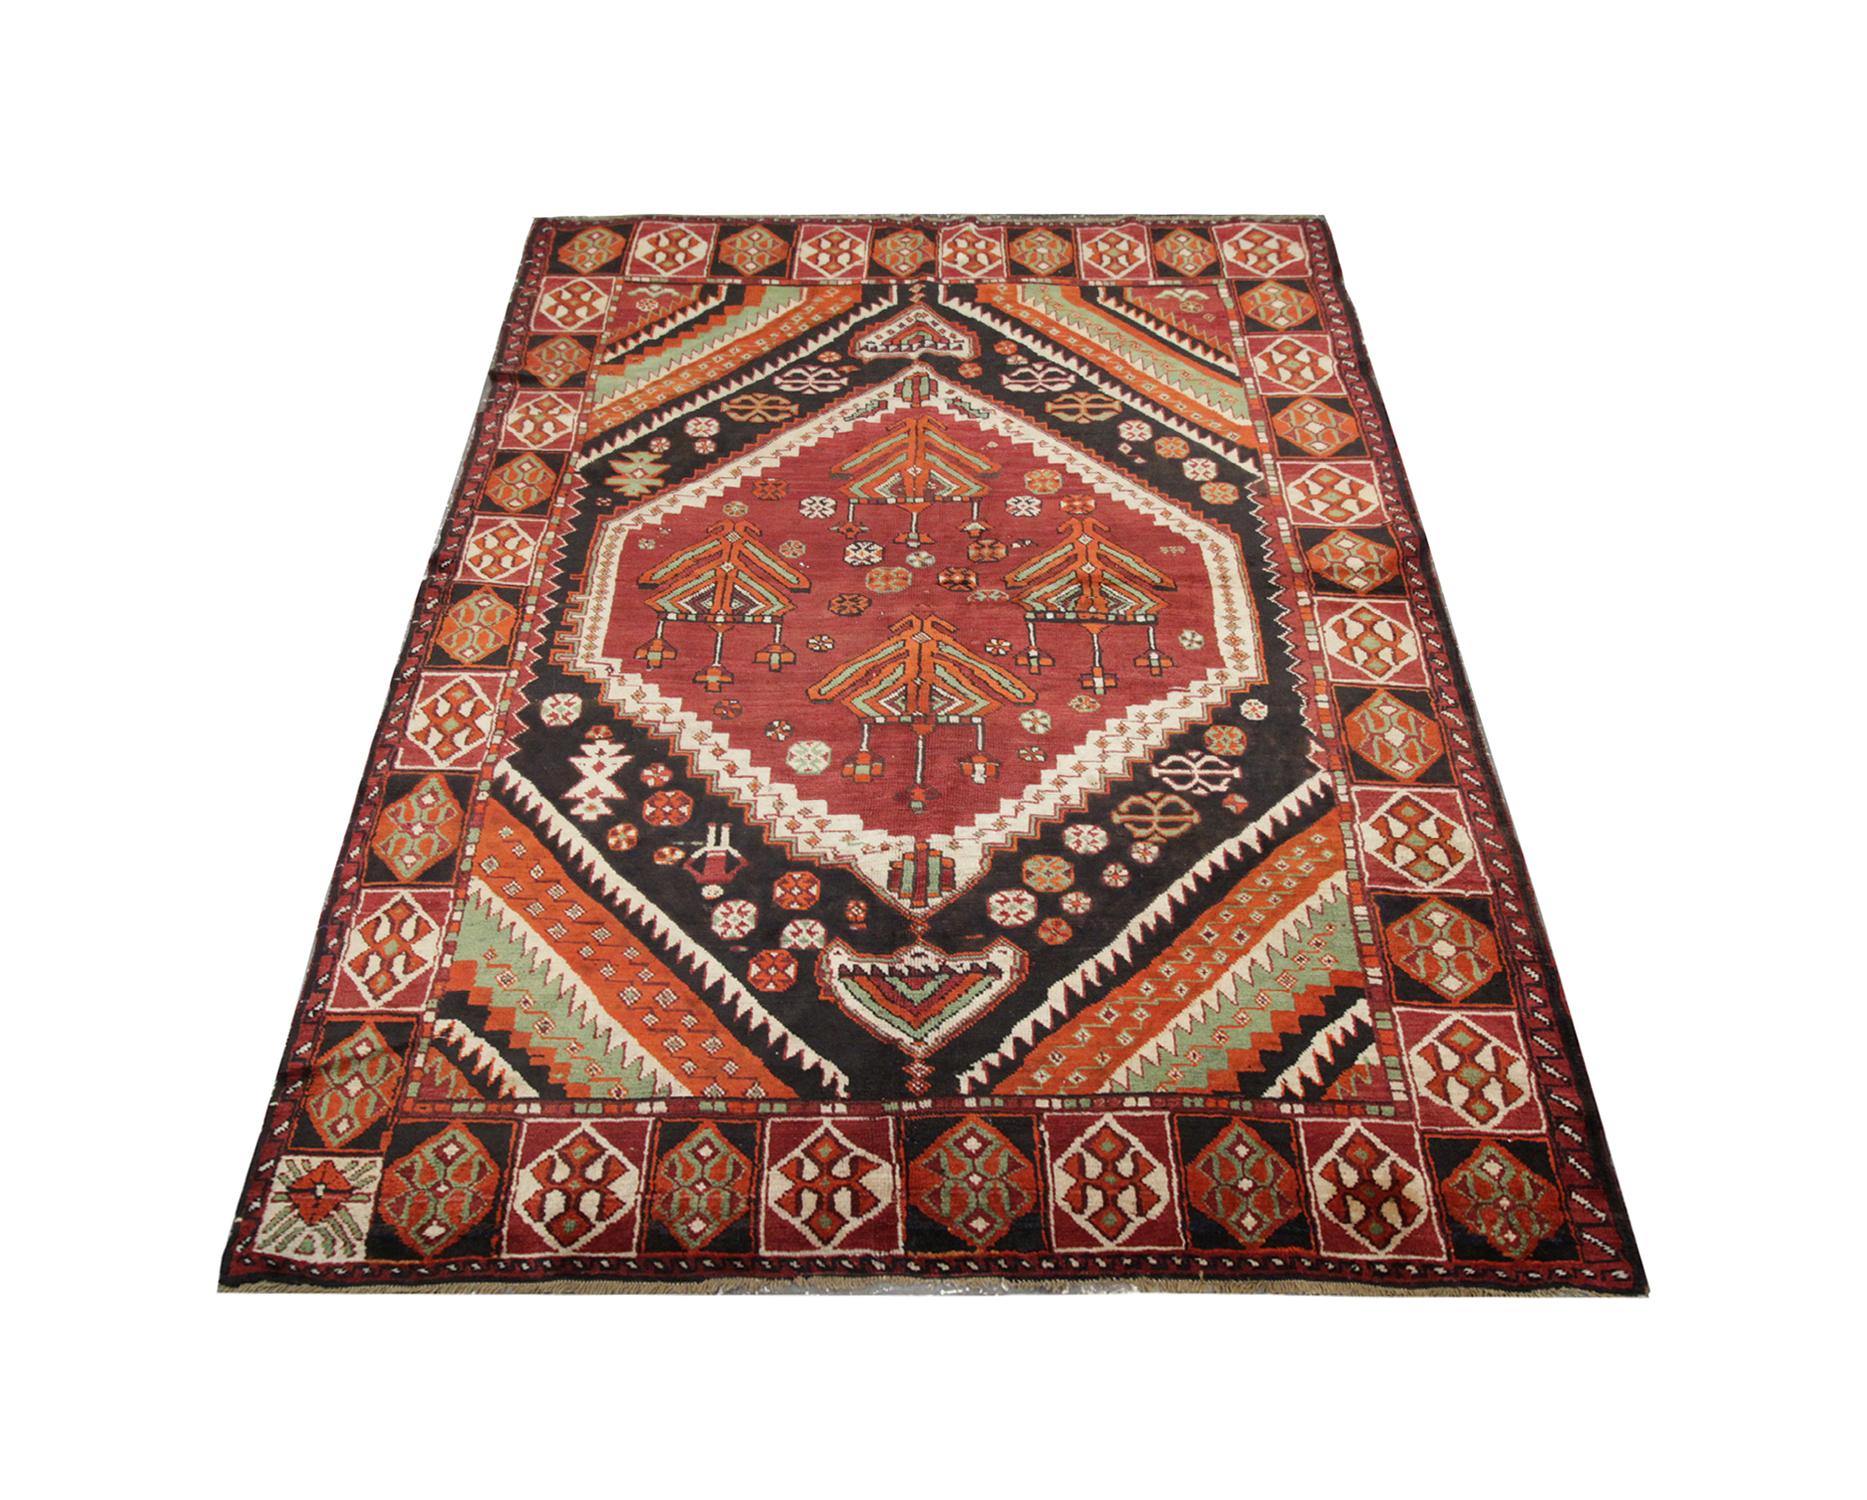 Rich, bold reds and oranges elevate the design in this high-quality antique Azerbaijan rug was handwoven in 1920 with hand-spun, vegetable-dyed wool, and cotton, by some of the finest Caucasian artisans. Perfect for both modern or traditional